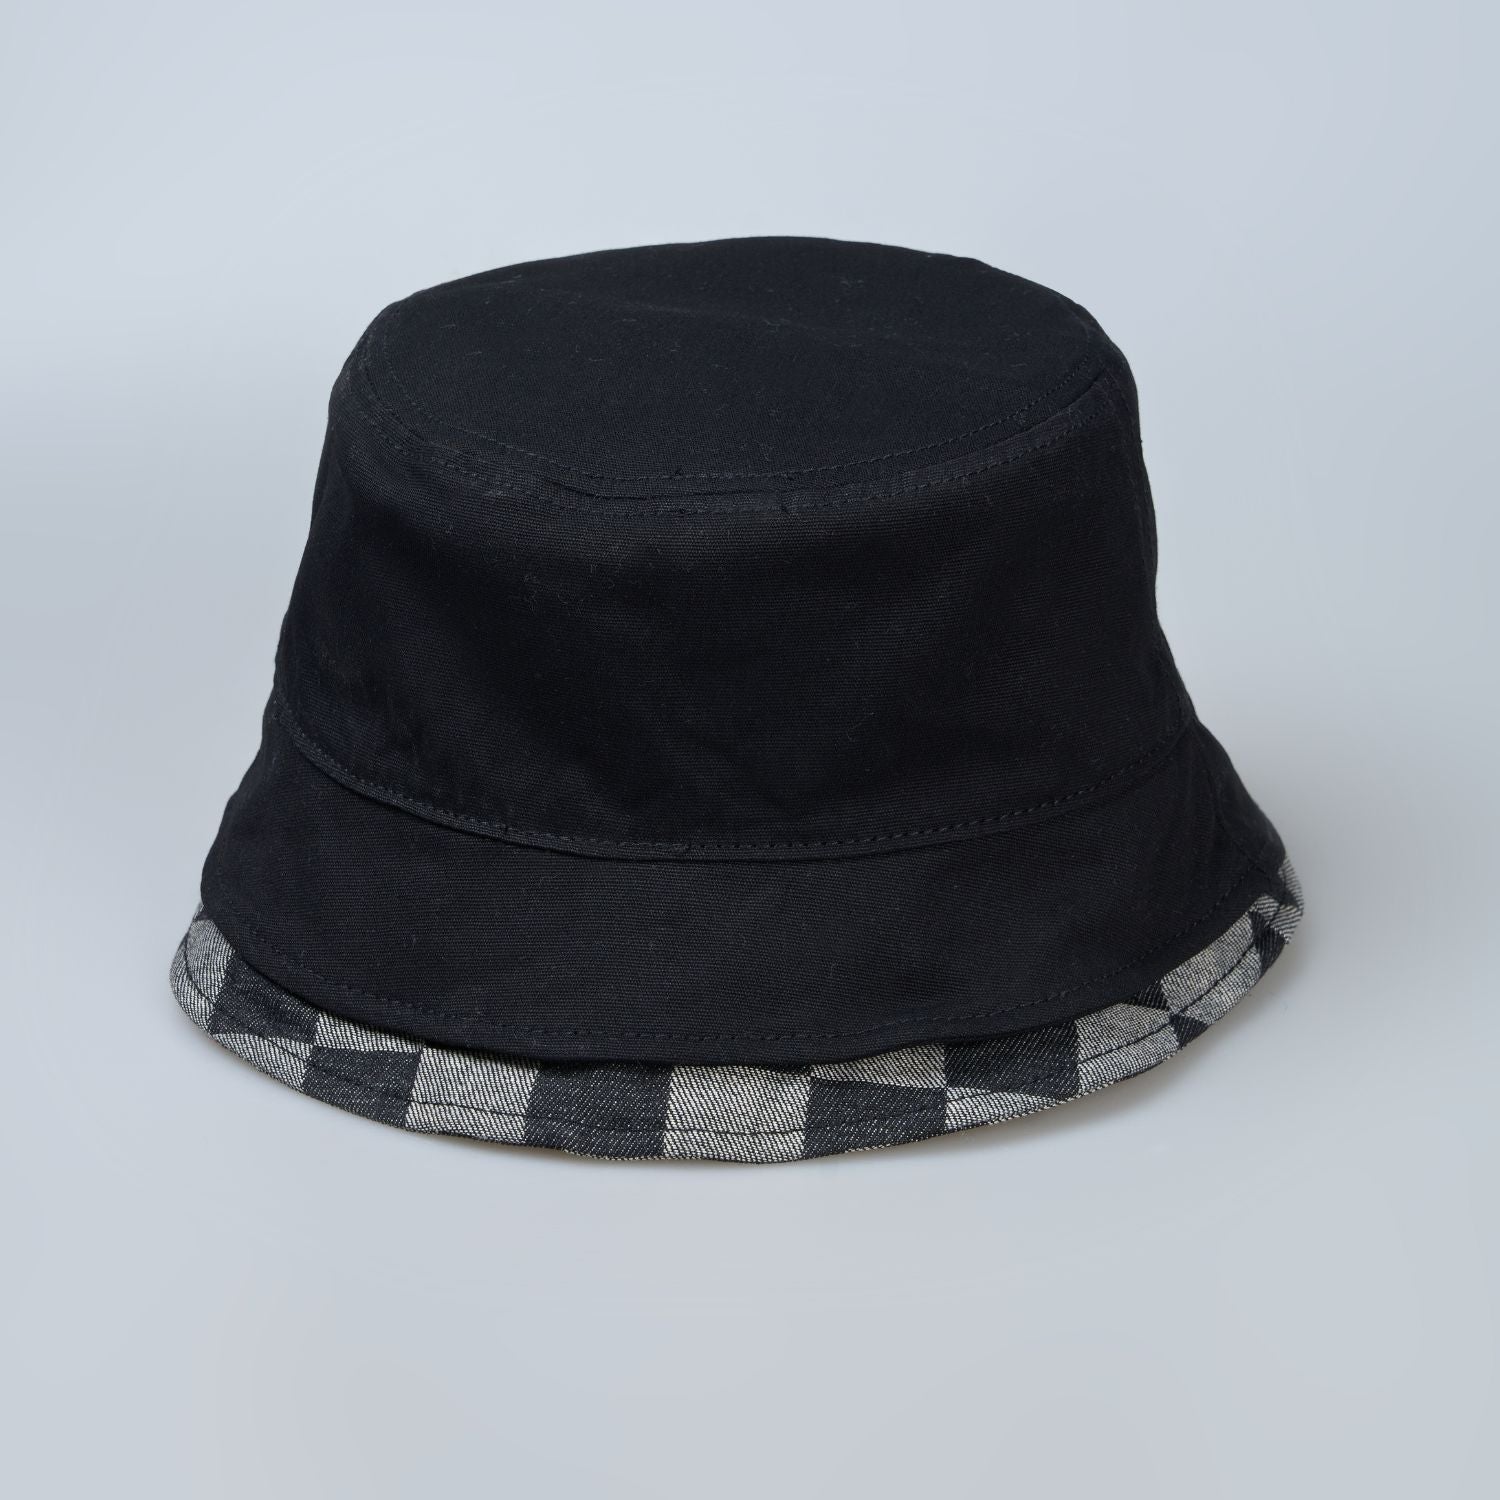 Black colored, chequered pattern, lightweight bucket hat for men, back view.